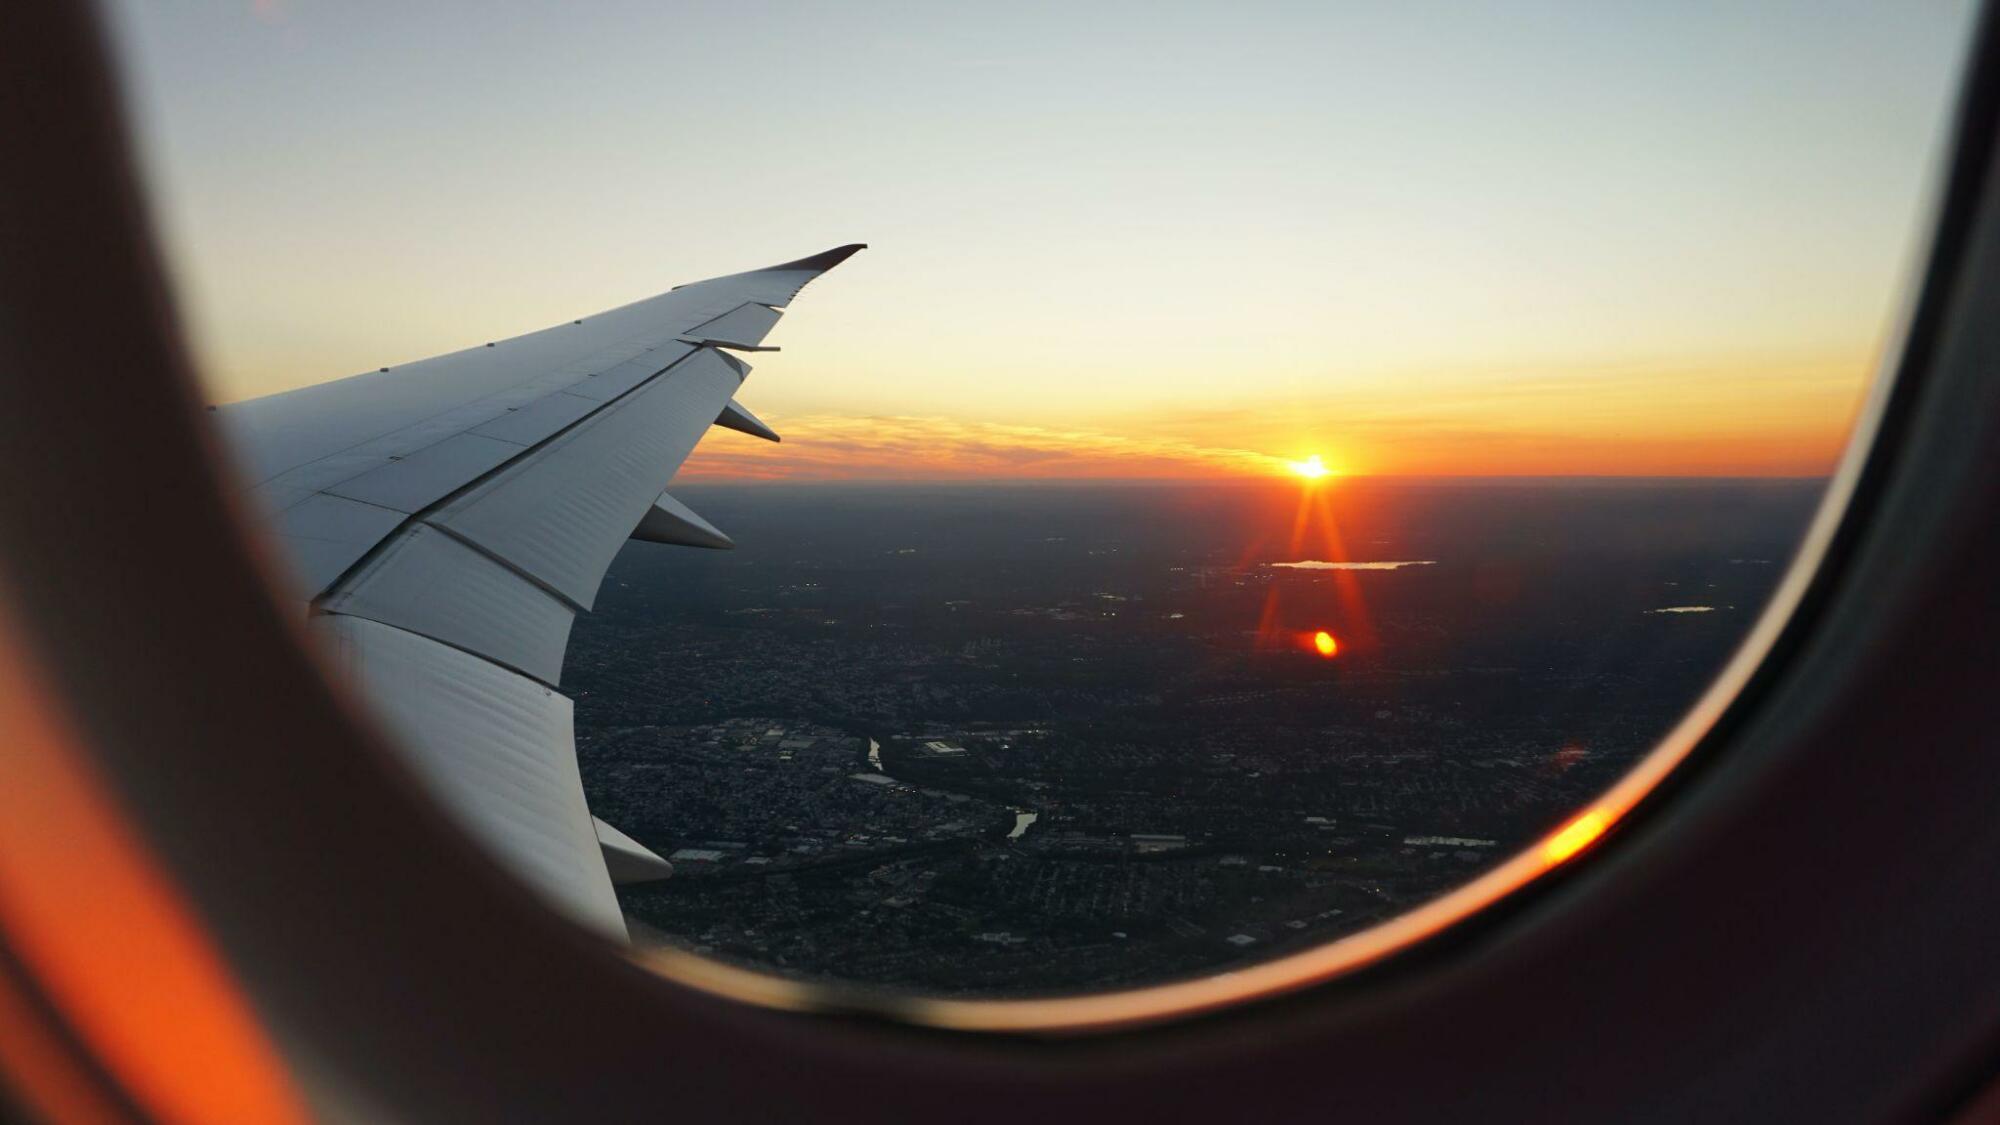 Tips for travelers: An airplane wing is seen through a window at sunset.